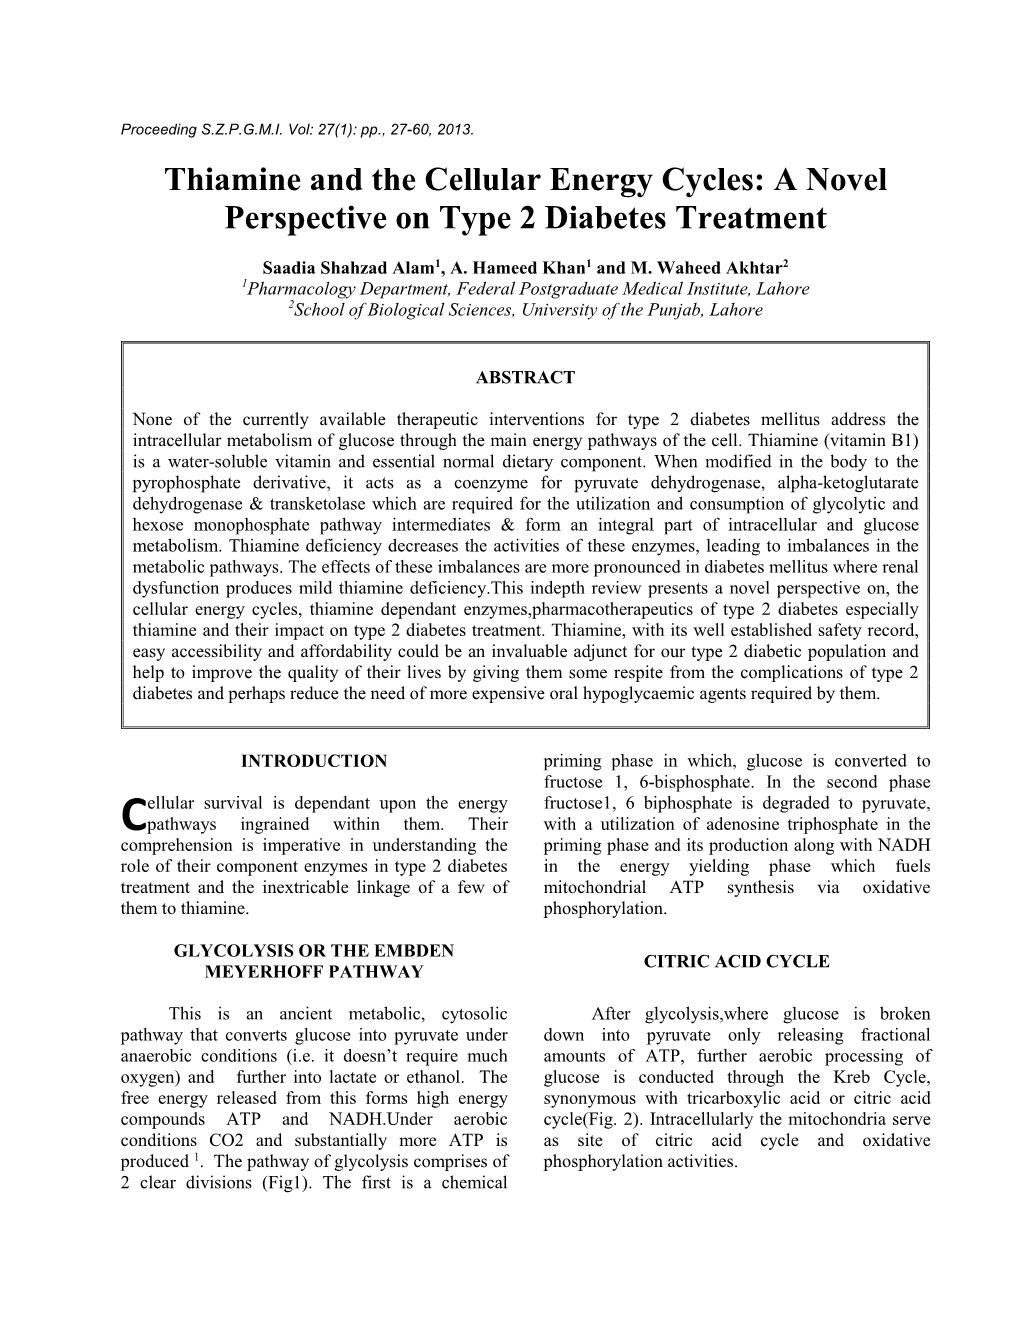 Thiamine and the Cellular Energy Cycles: a Novel Perspective on Type 2 Diabetes Treatment